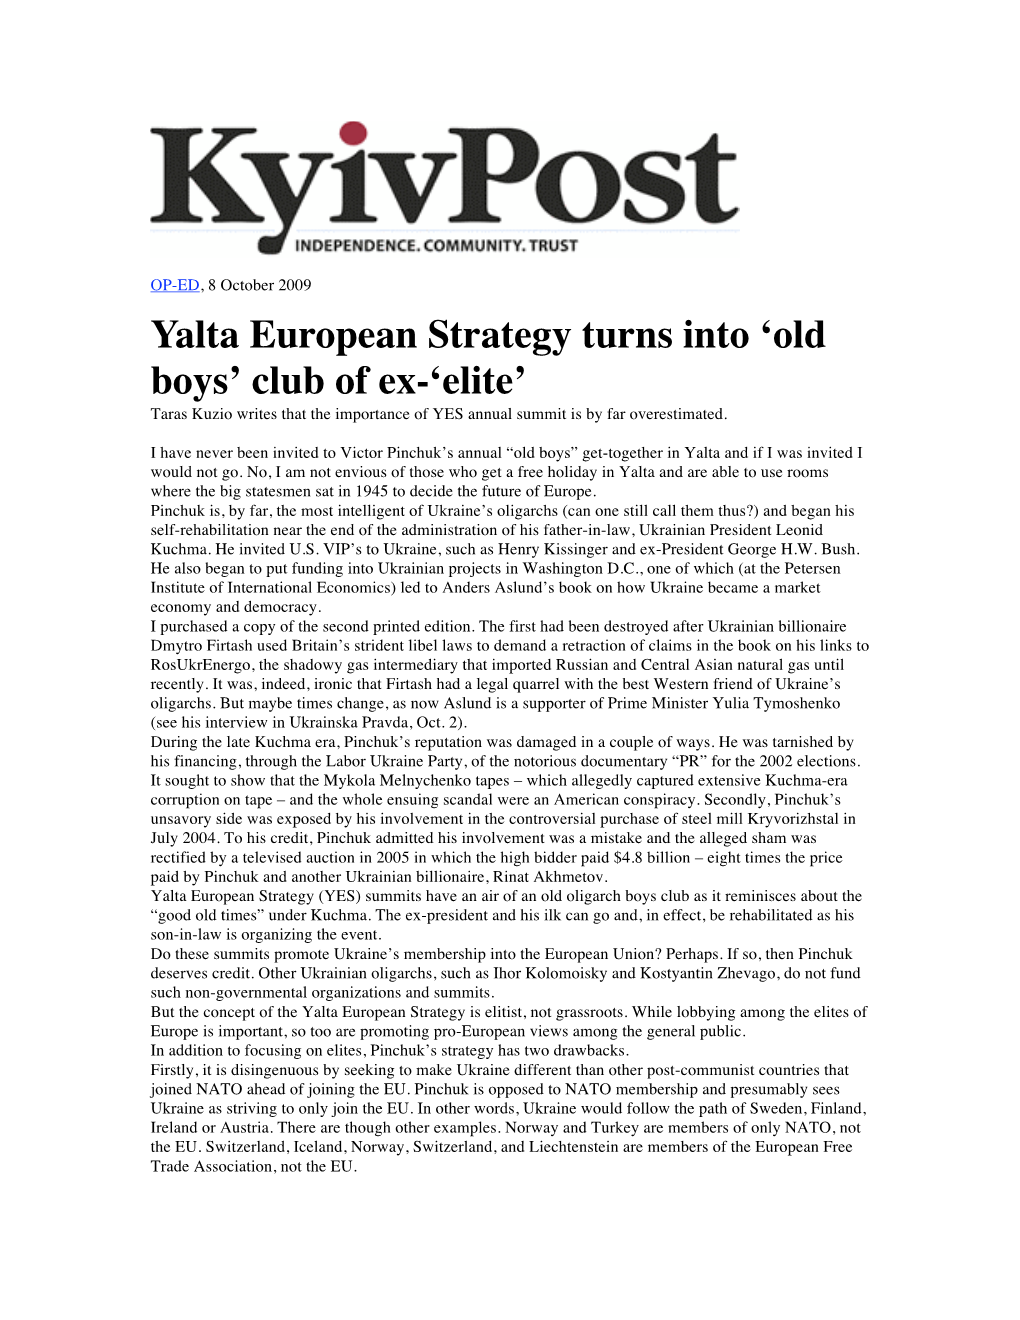 Yalta European Strategy Turns Into ‘Old Boys’ Club of Ex-‘Elite’ Taras Kuzio Writes That the Importance of YES Annual Summit Is by Far Overestimated